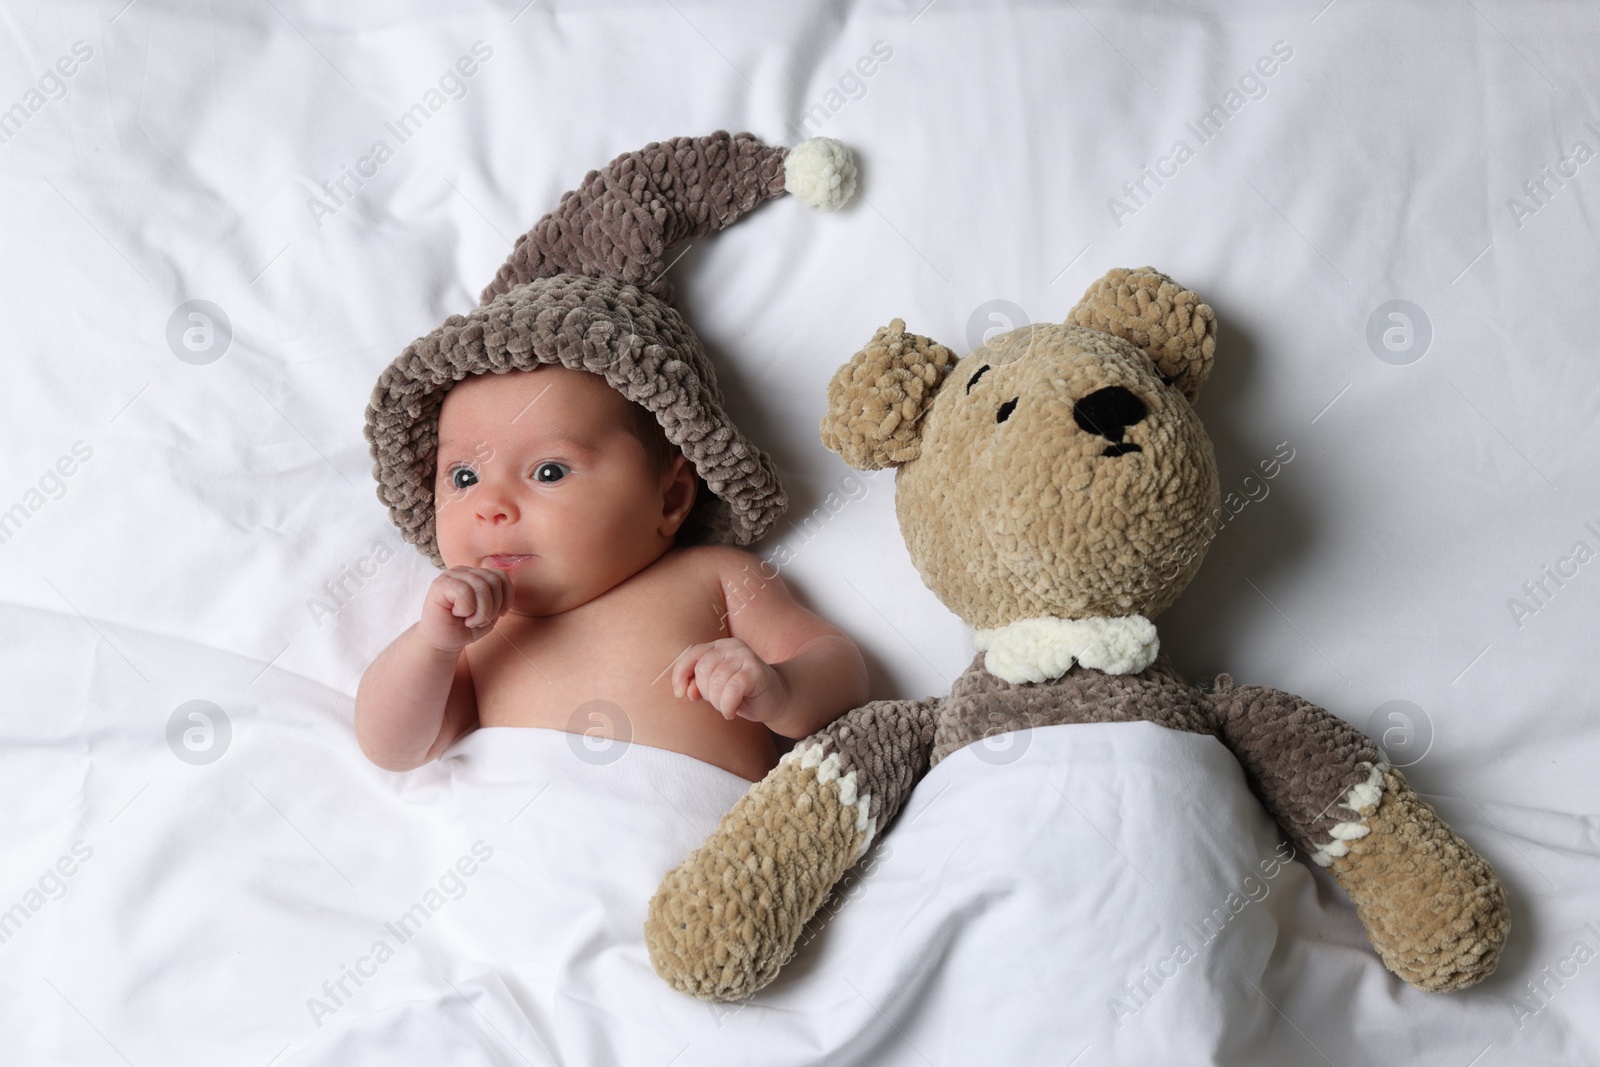 Photo of Cute little baby with toy bear lying under blanket in bed, top view